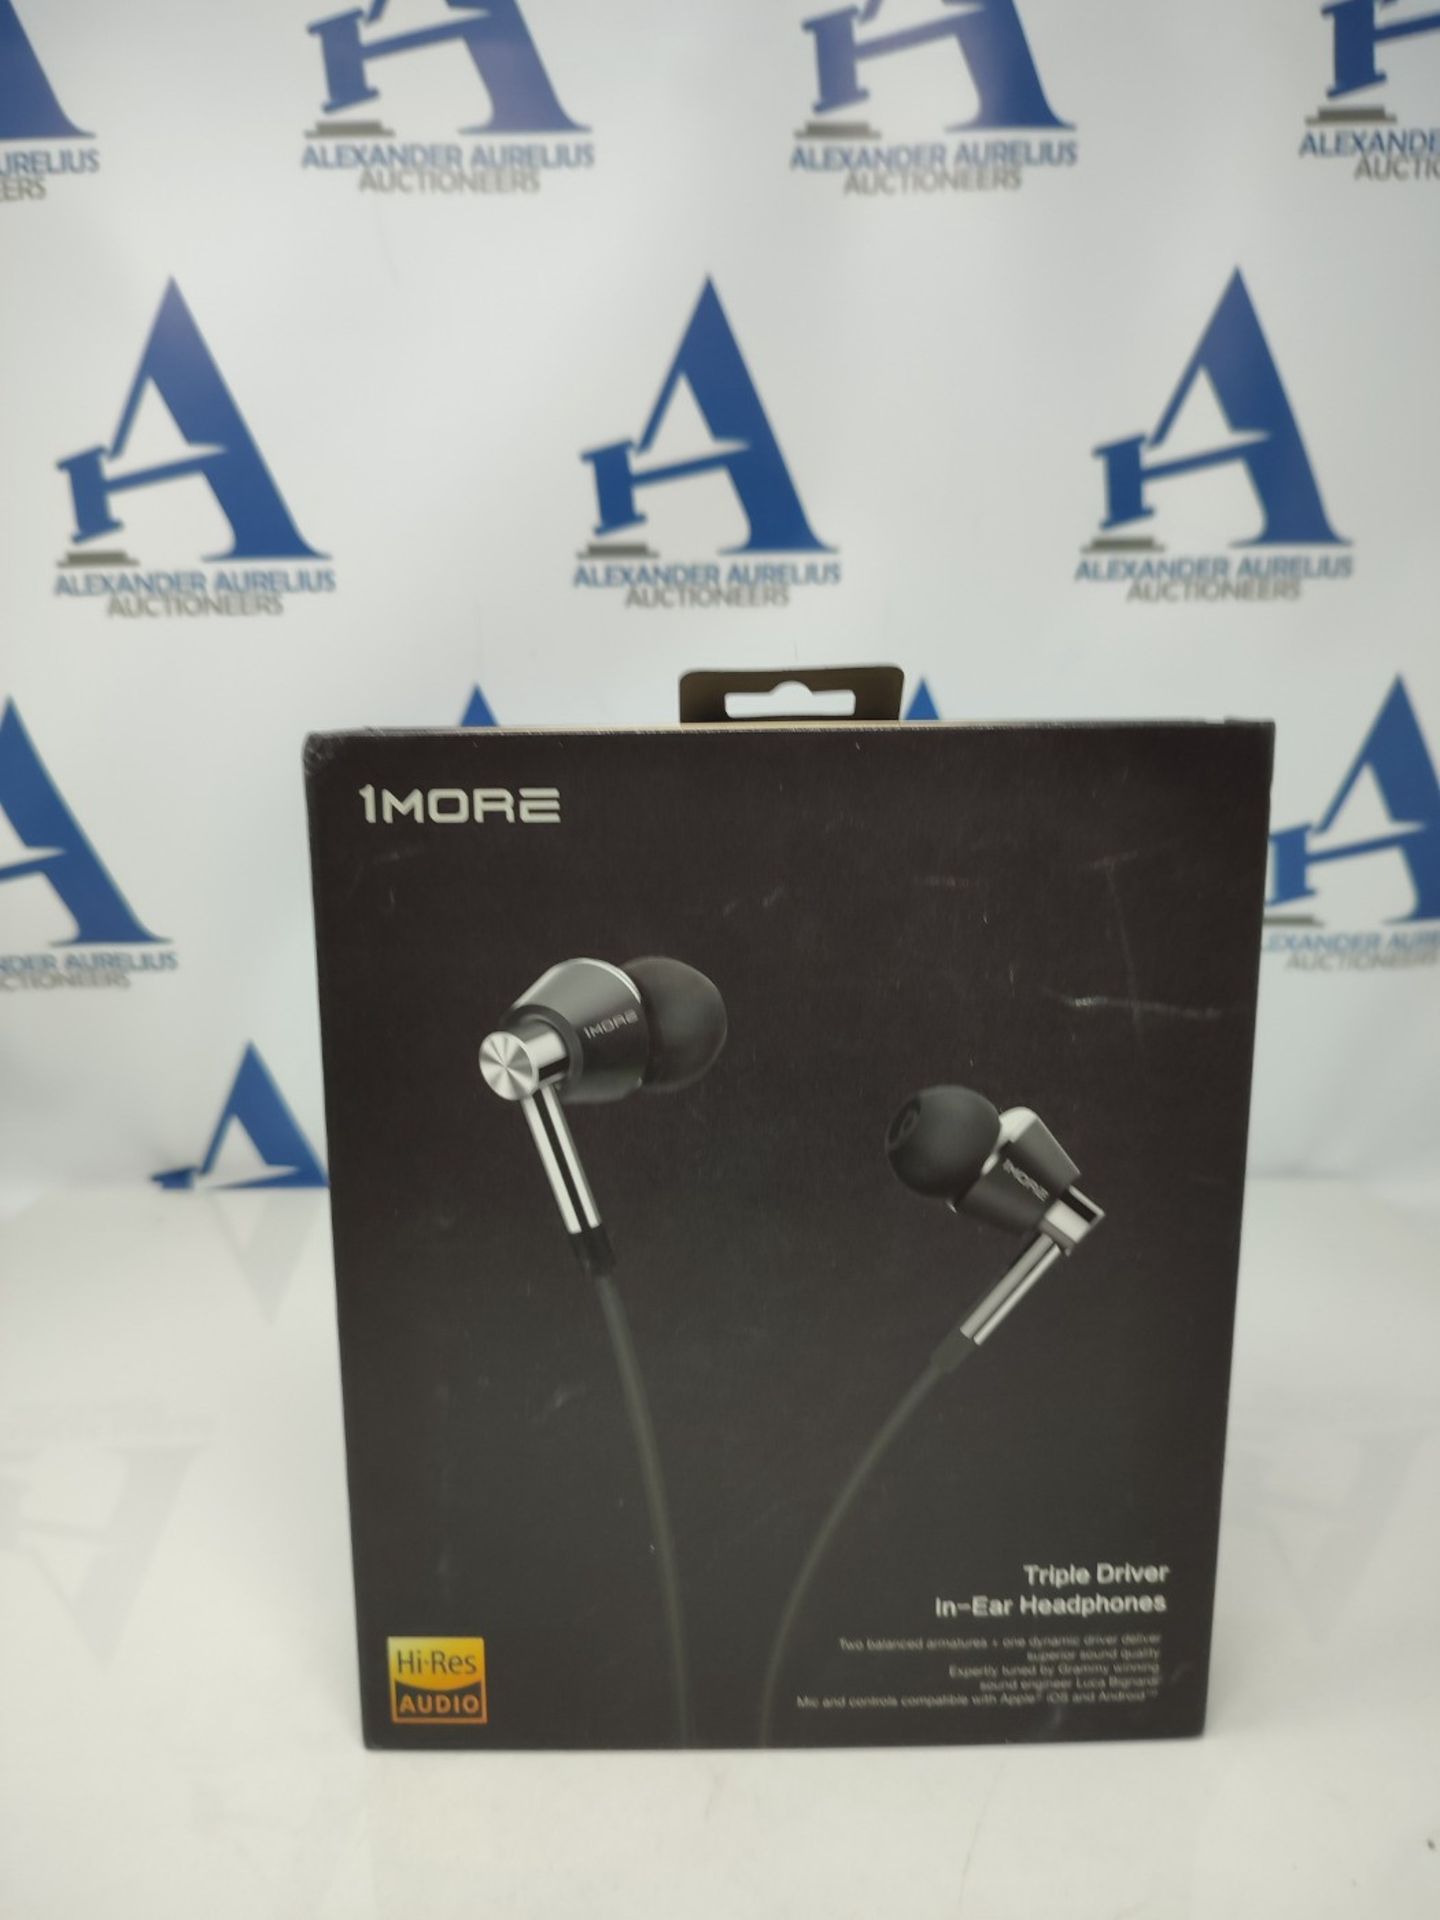 RRP £65.00 [INCOMPLETE] 1MORE Triple Driver Headphones, Wired In-Ear Hi-Fi Earphones with High Re - Image 2 of 3